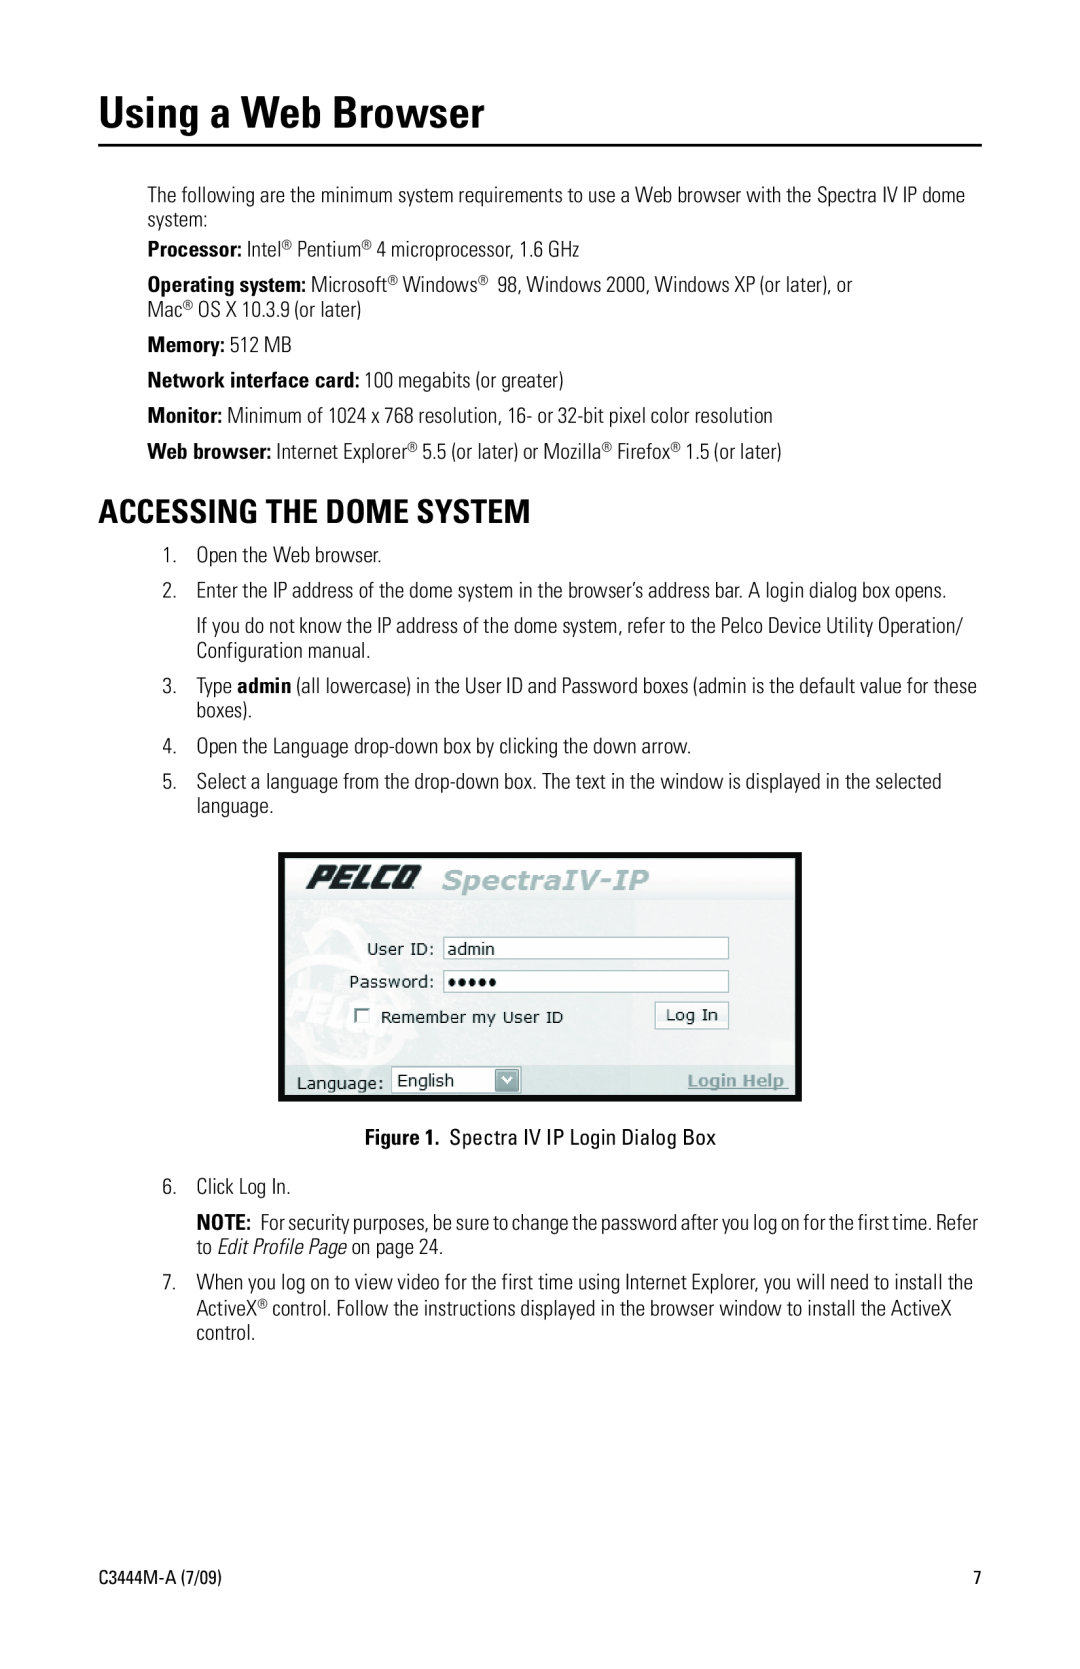 Pelco IV IP manual Using a Web Browser, Accessing The Dome System, Memory 512 MB 